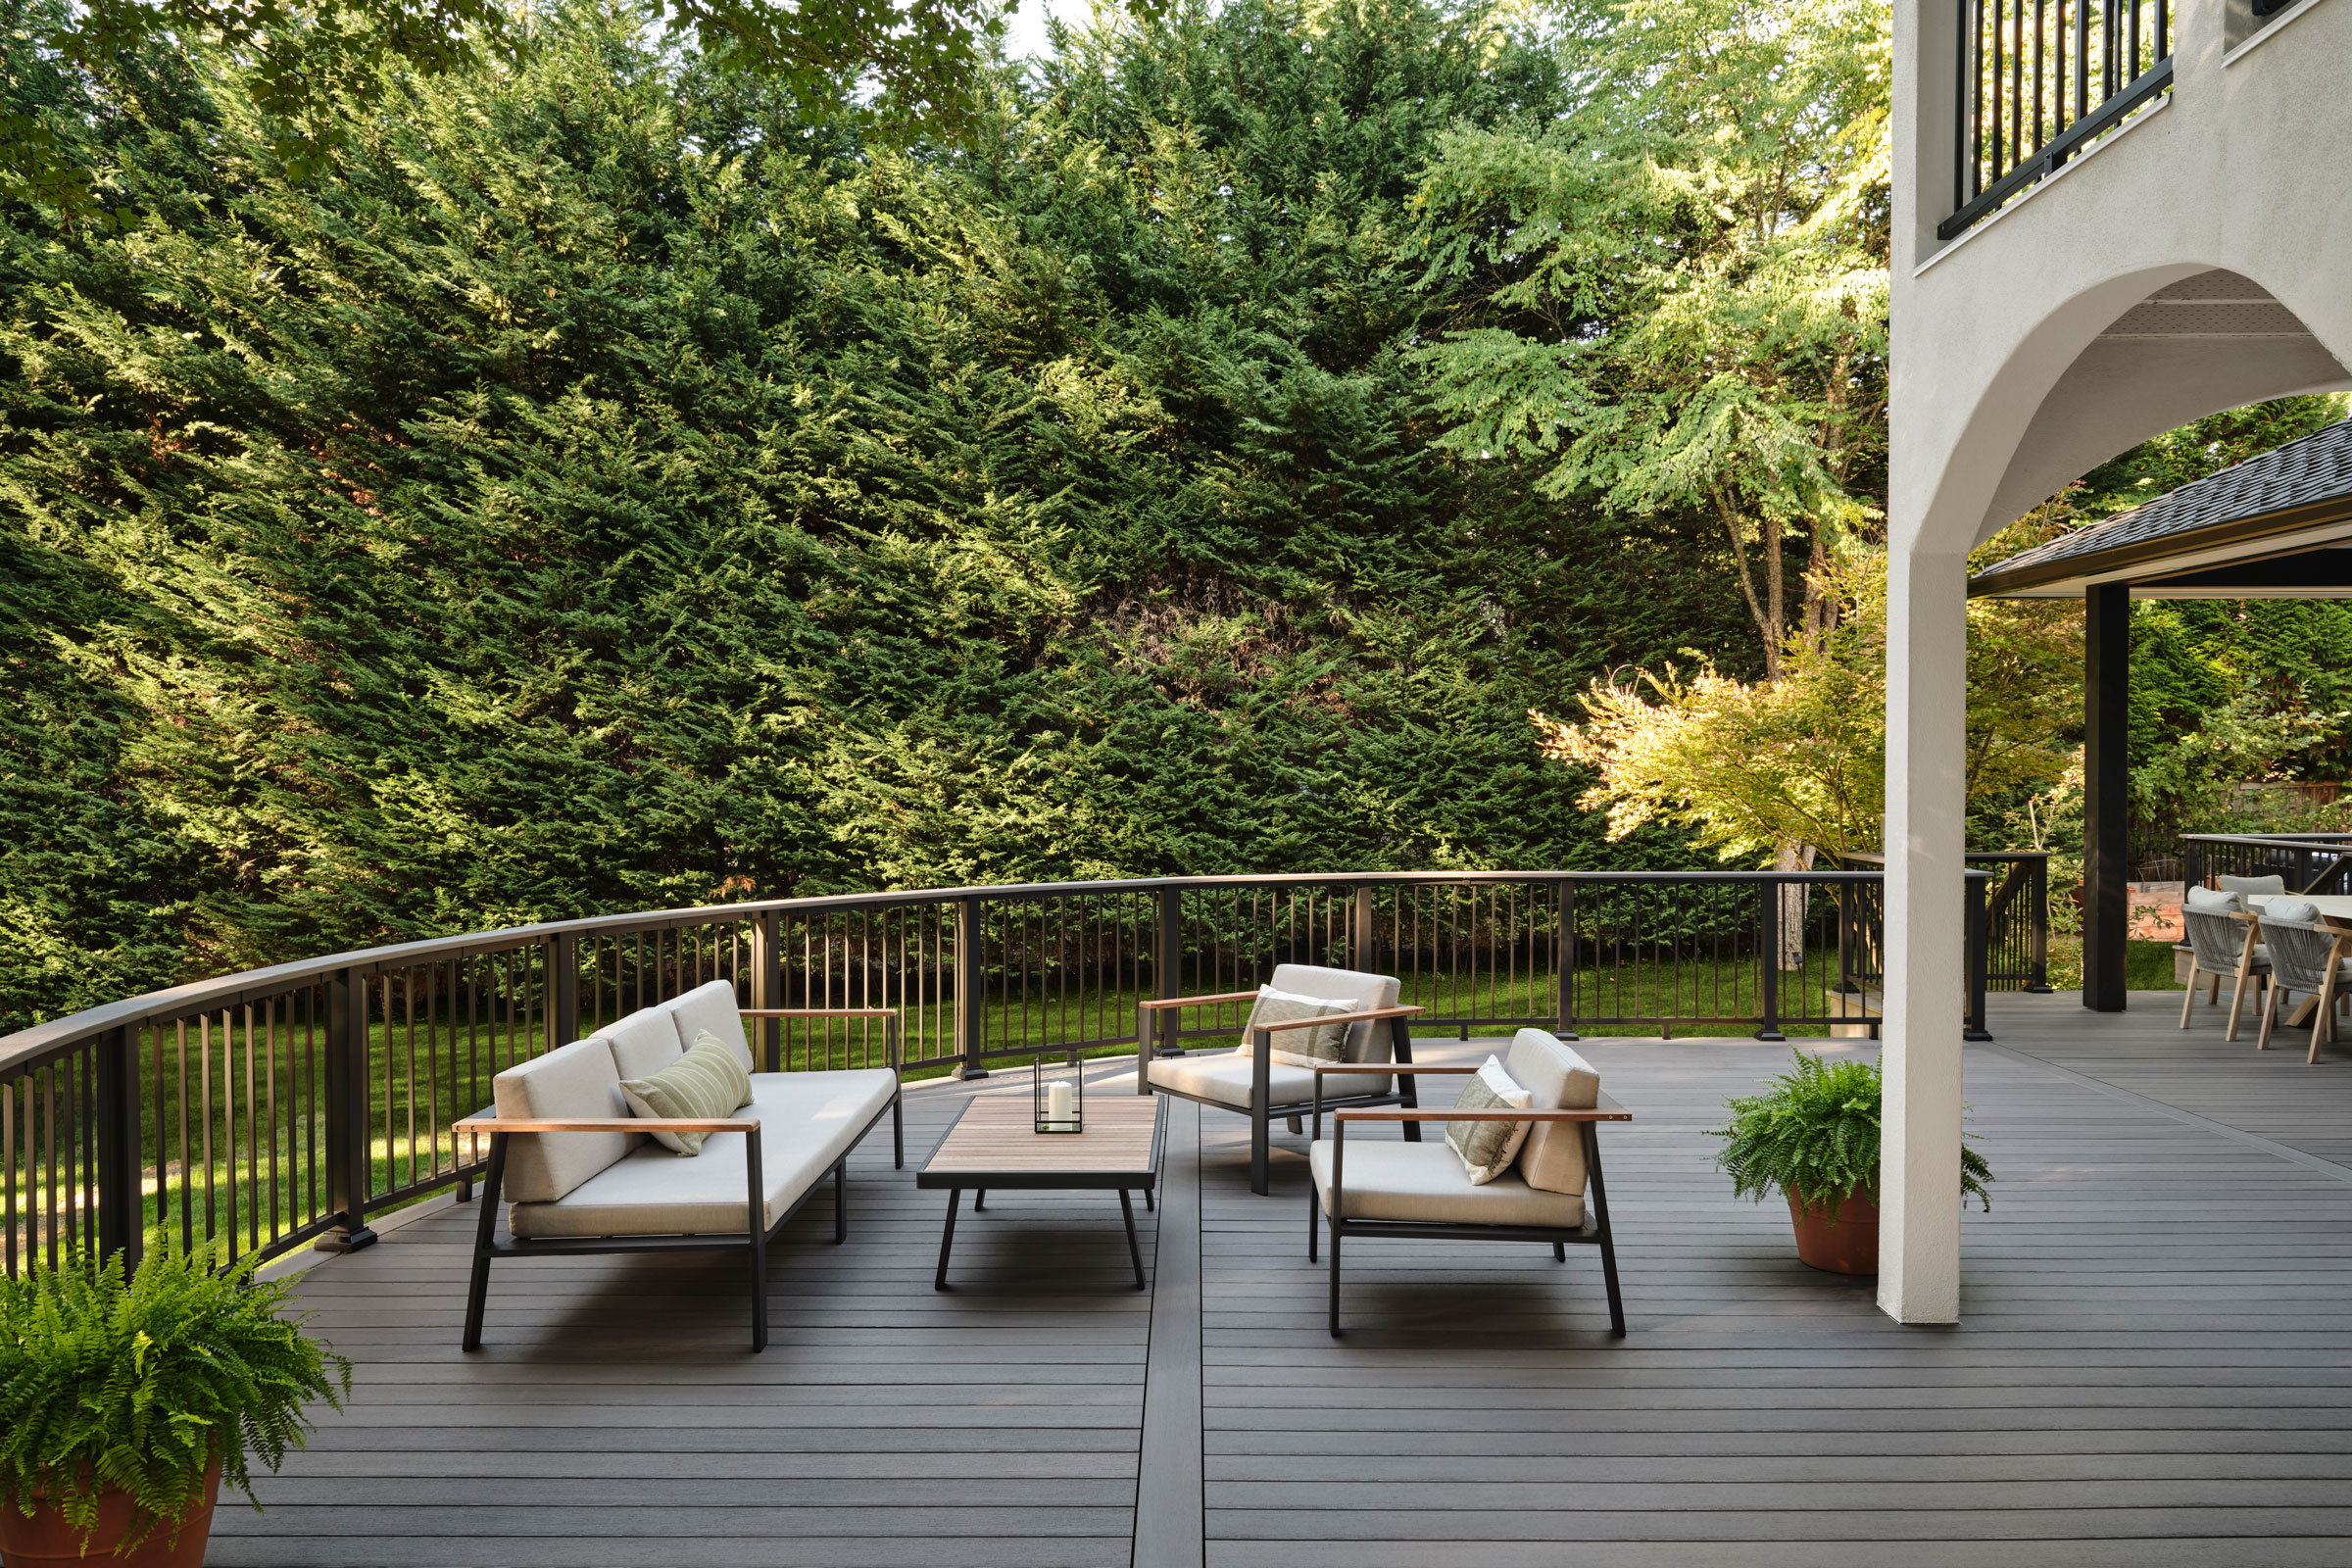 Designing Outdoor Living Spaces that Blend Inside with Out